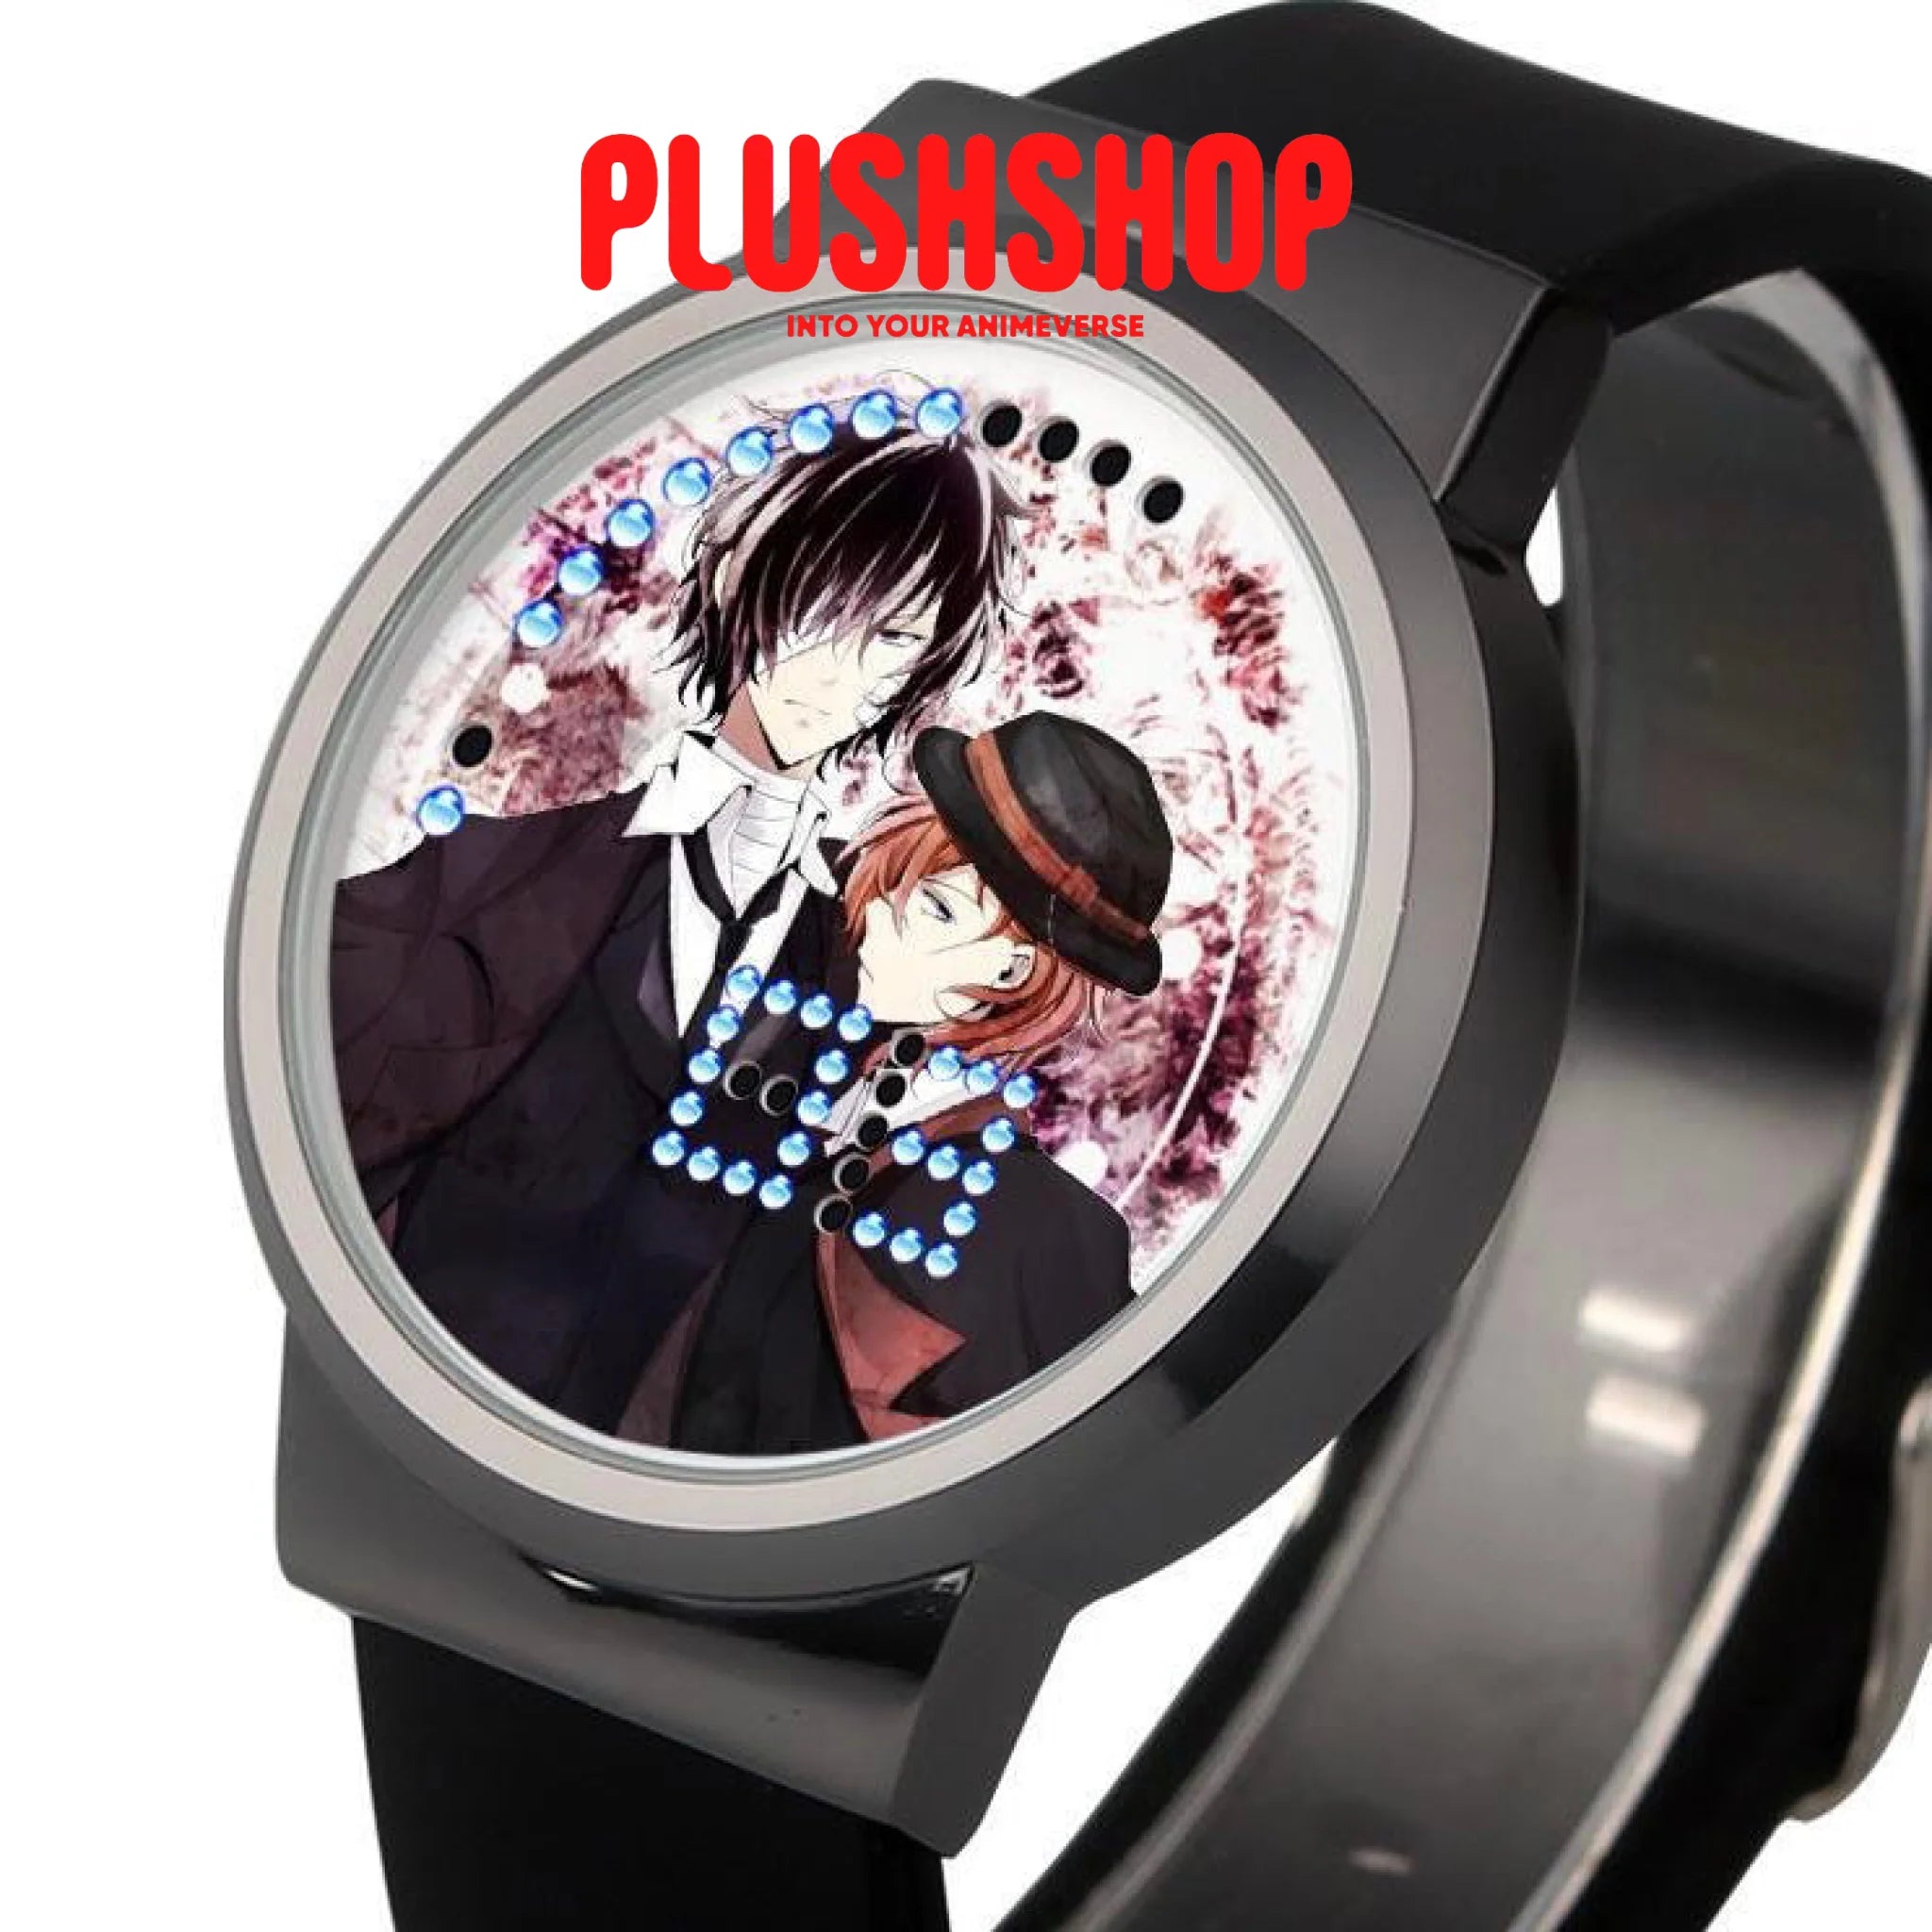 Bungo Stray Dogs Characters Led Animation Watch Peripheral Waterproof Touch Screen 3 手表